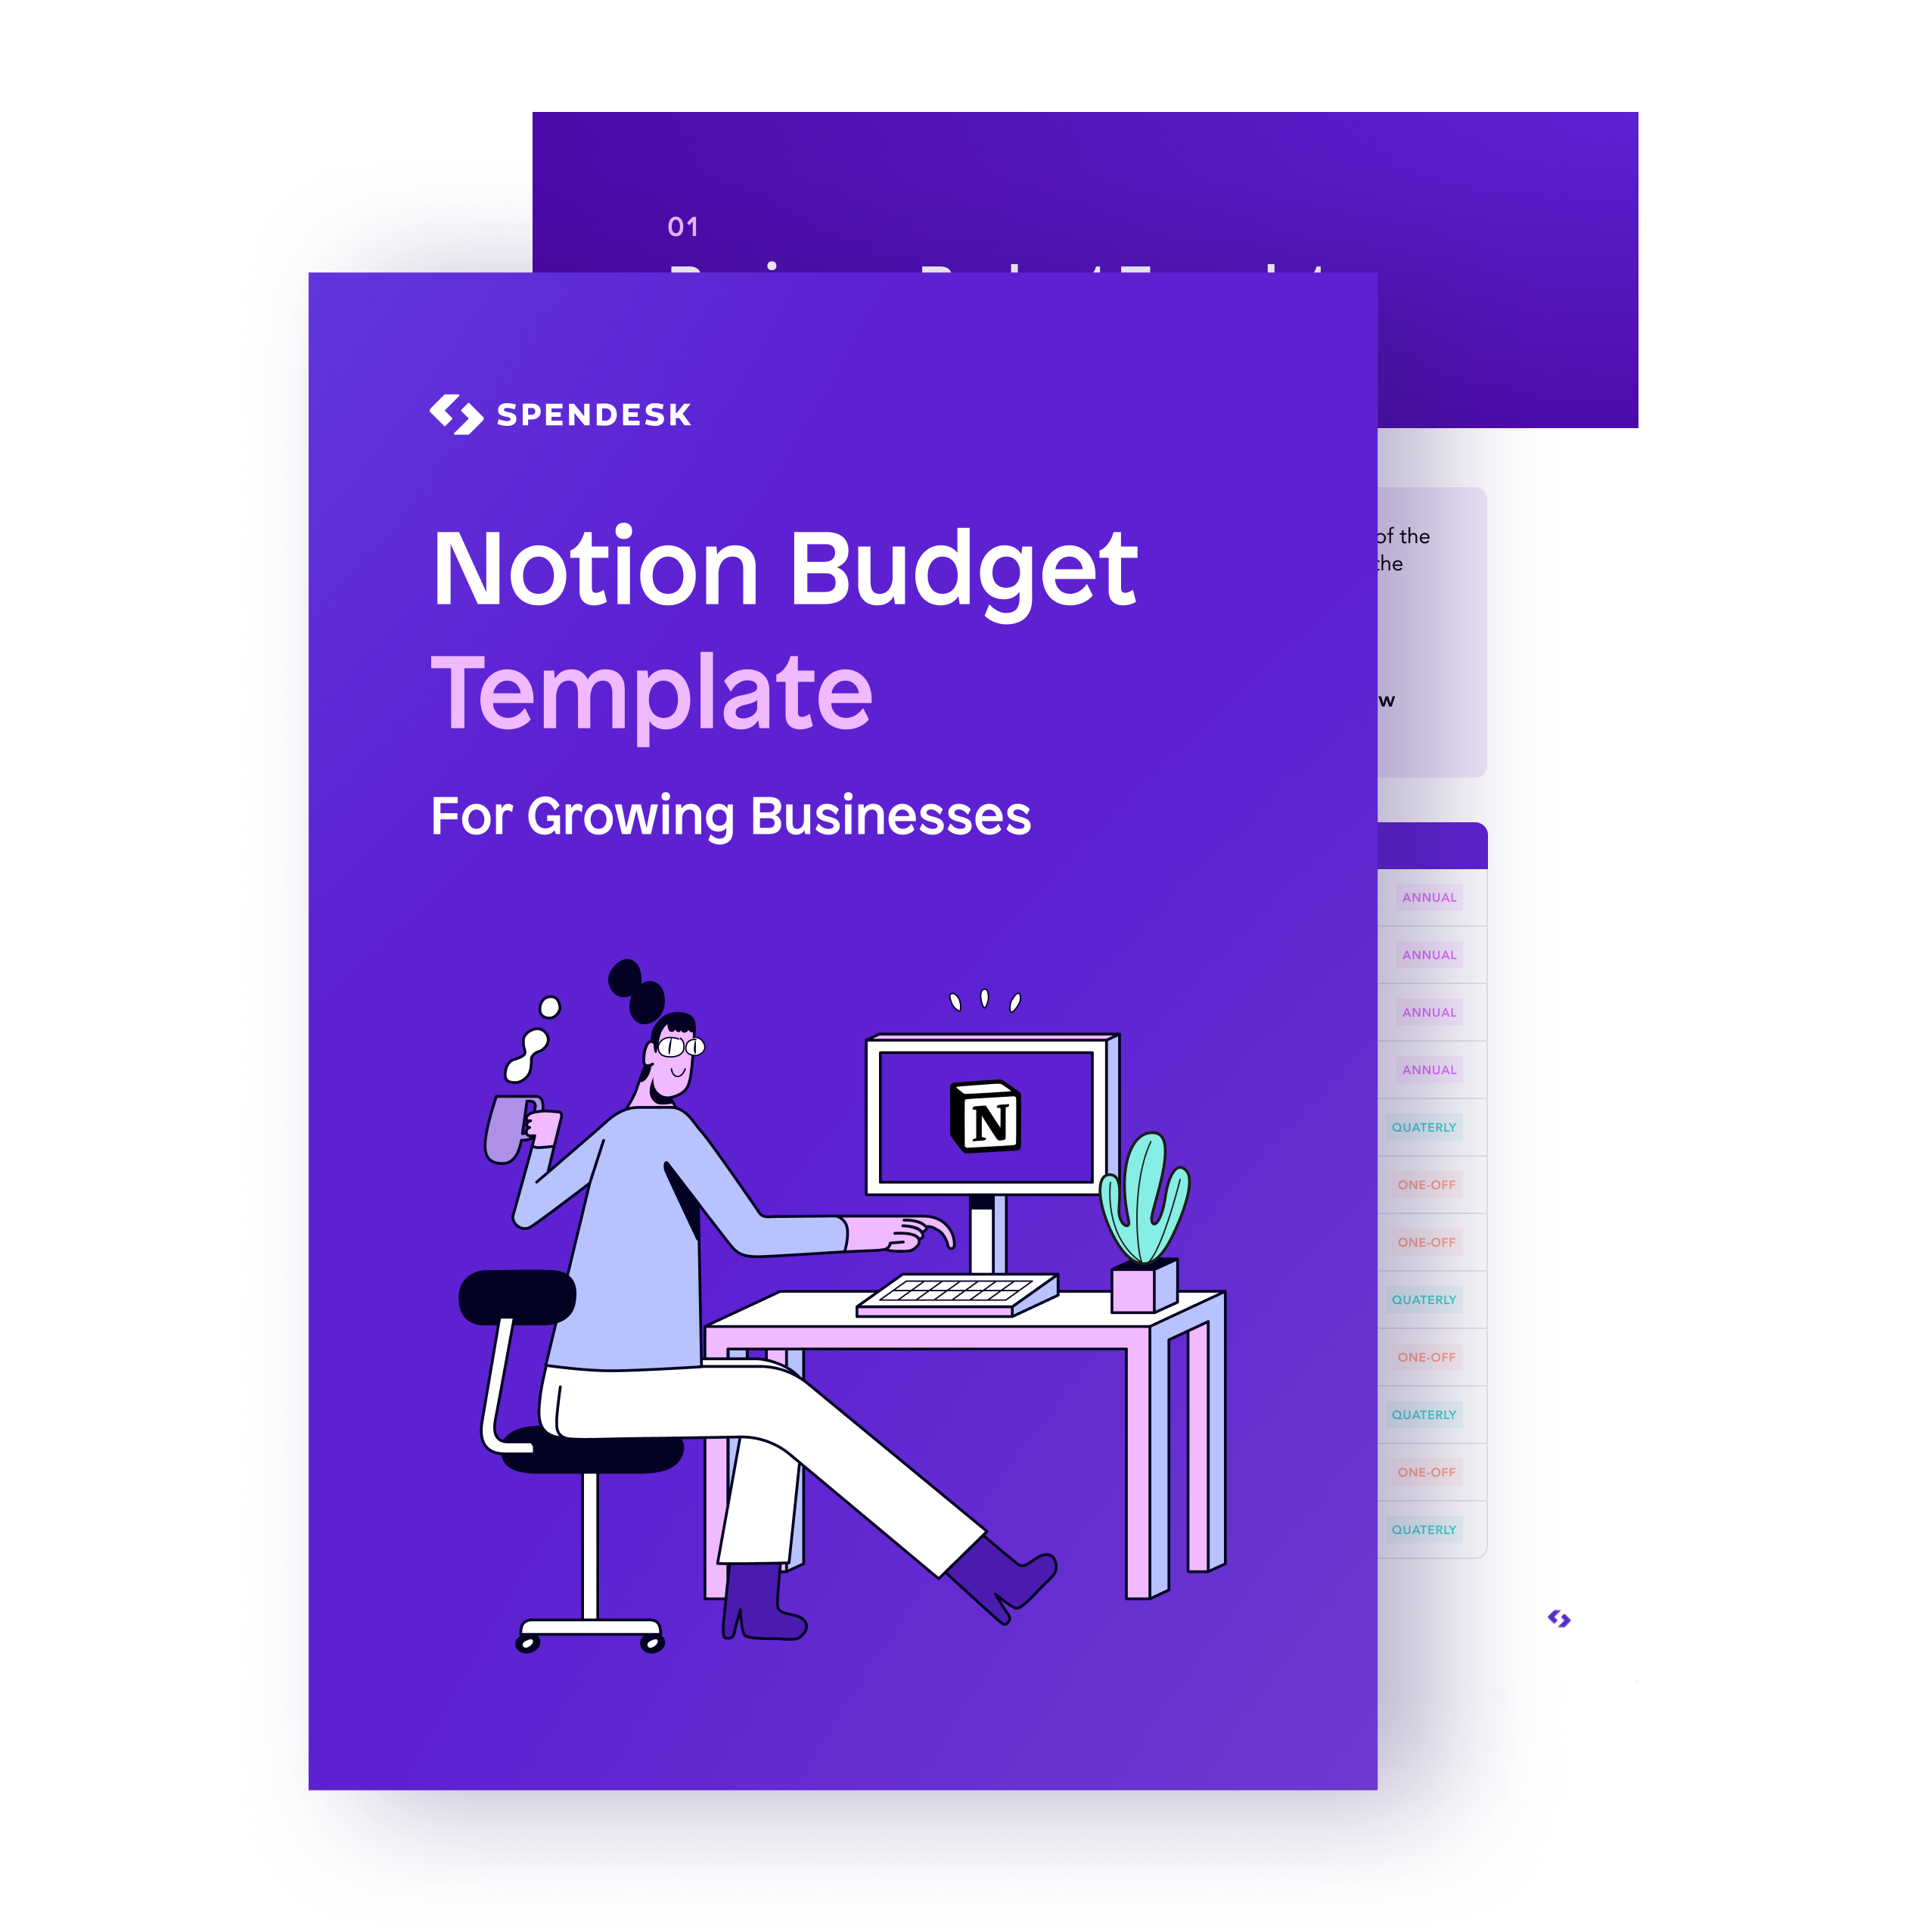 Notion budget template: Ready to use company budget